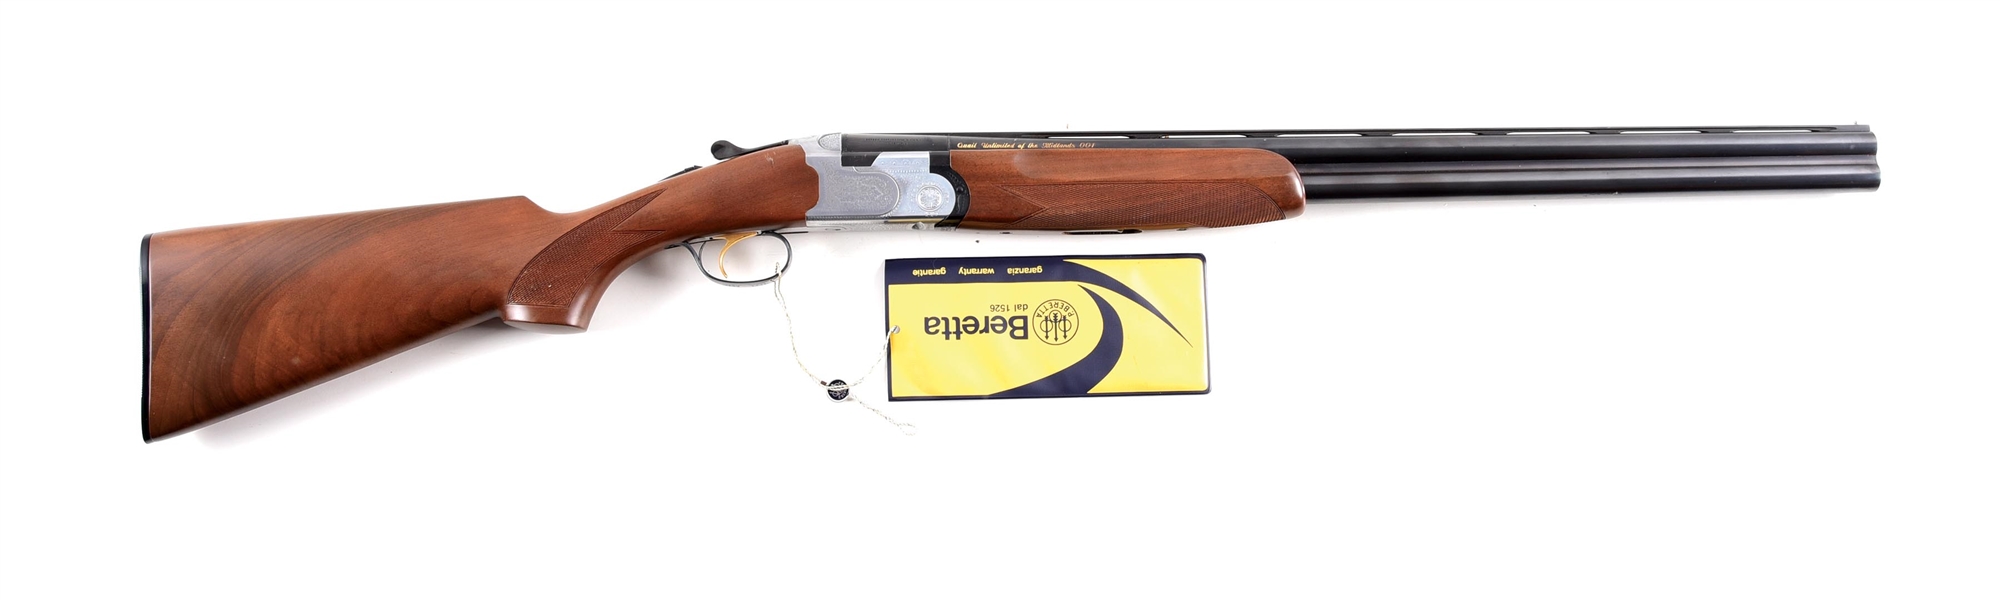 (M) ENGRAVED BERETTA MODEL S686 QUAIL UNLIMITED OVER-UNDER SHOTGUN WITH BOX.